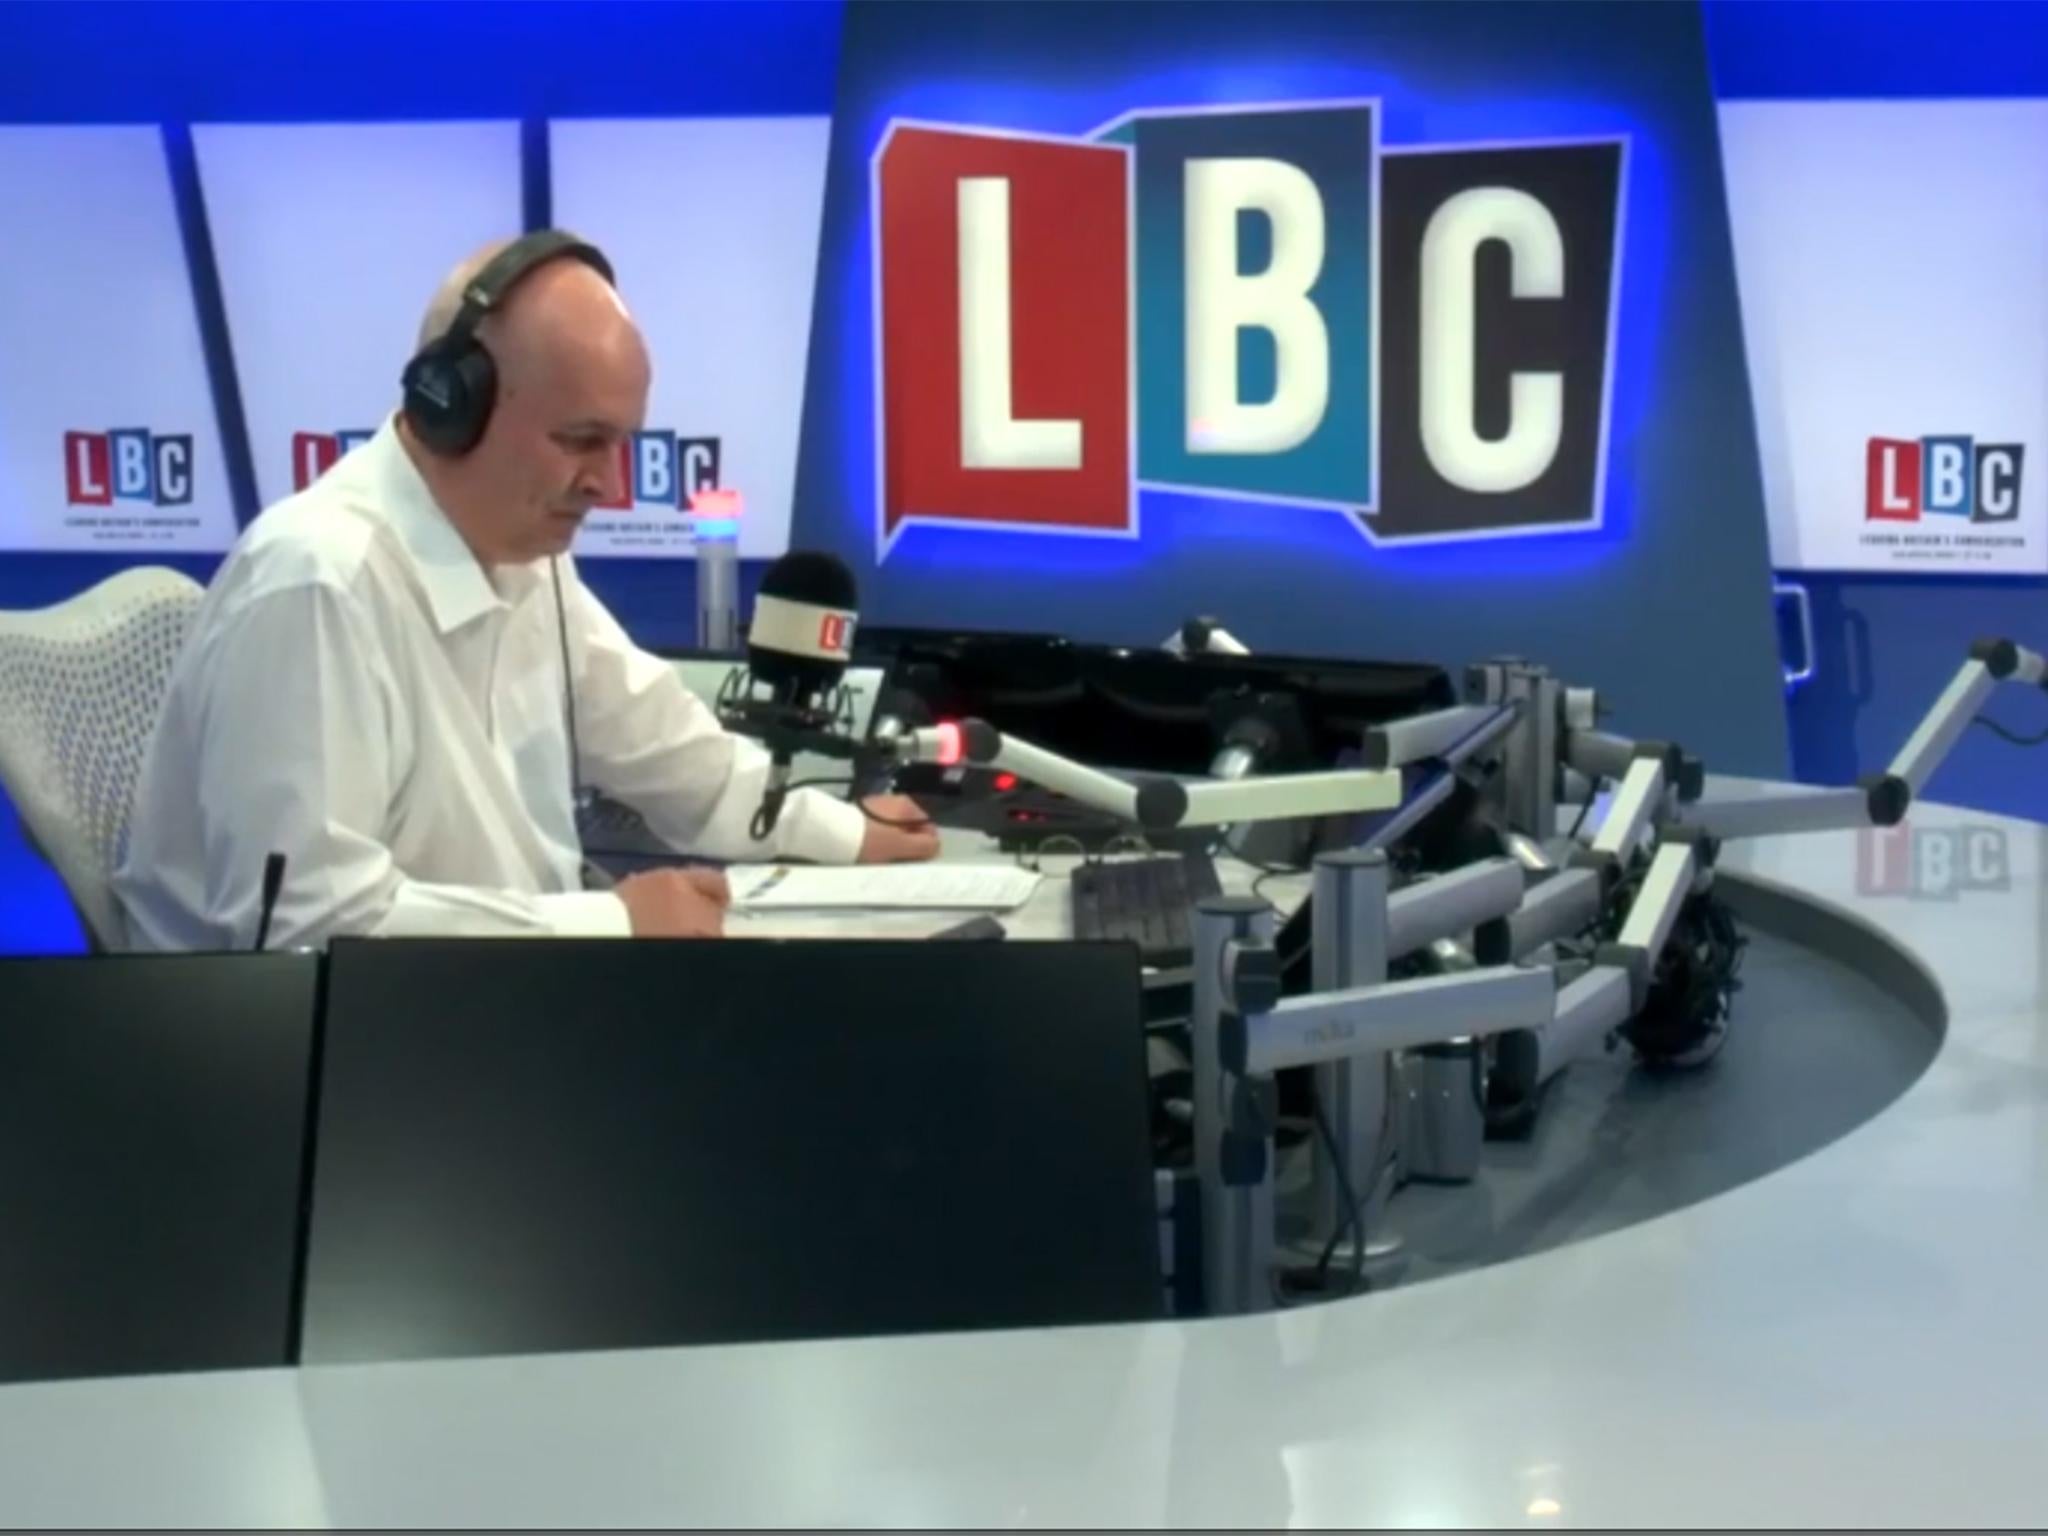 Iain Dale said it would be a ‘massive blow’ if he doesn’t win